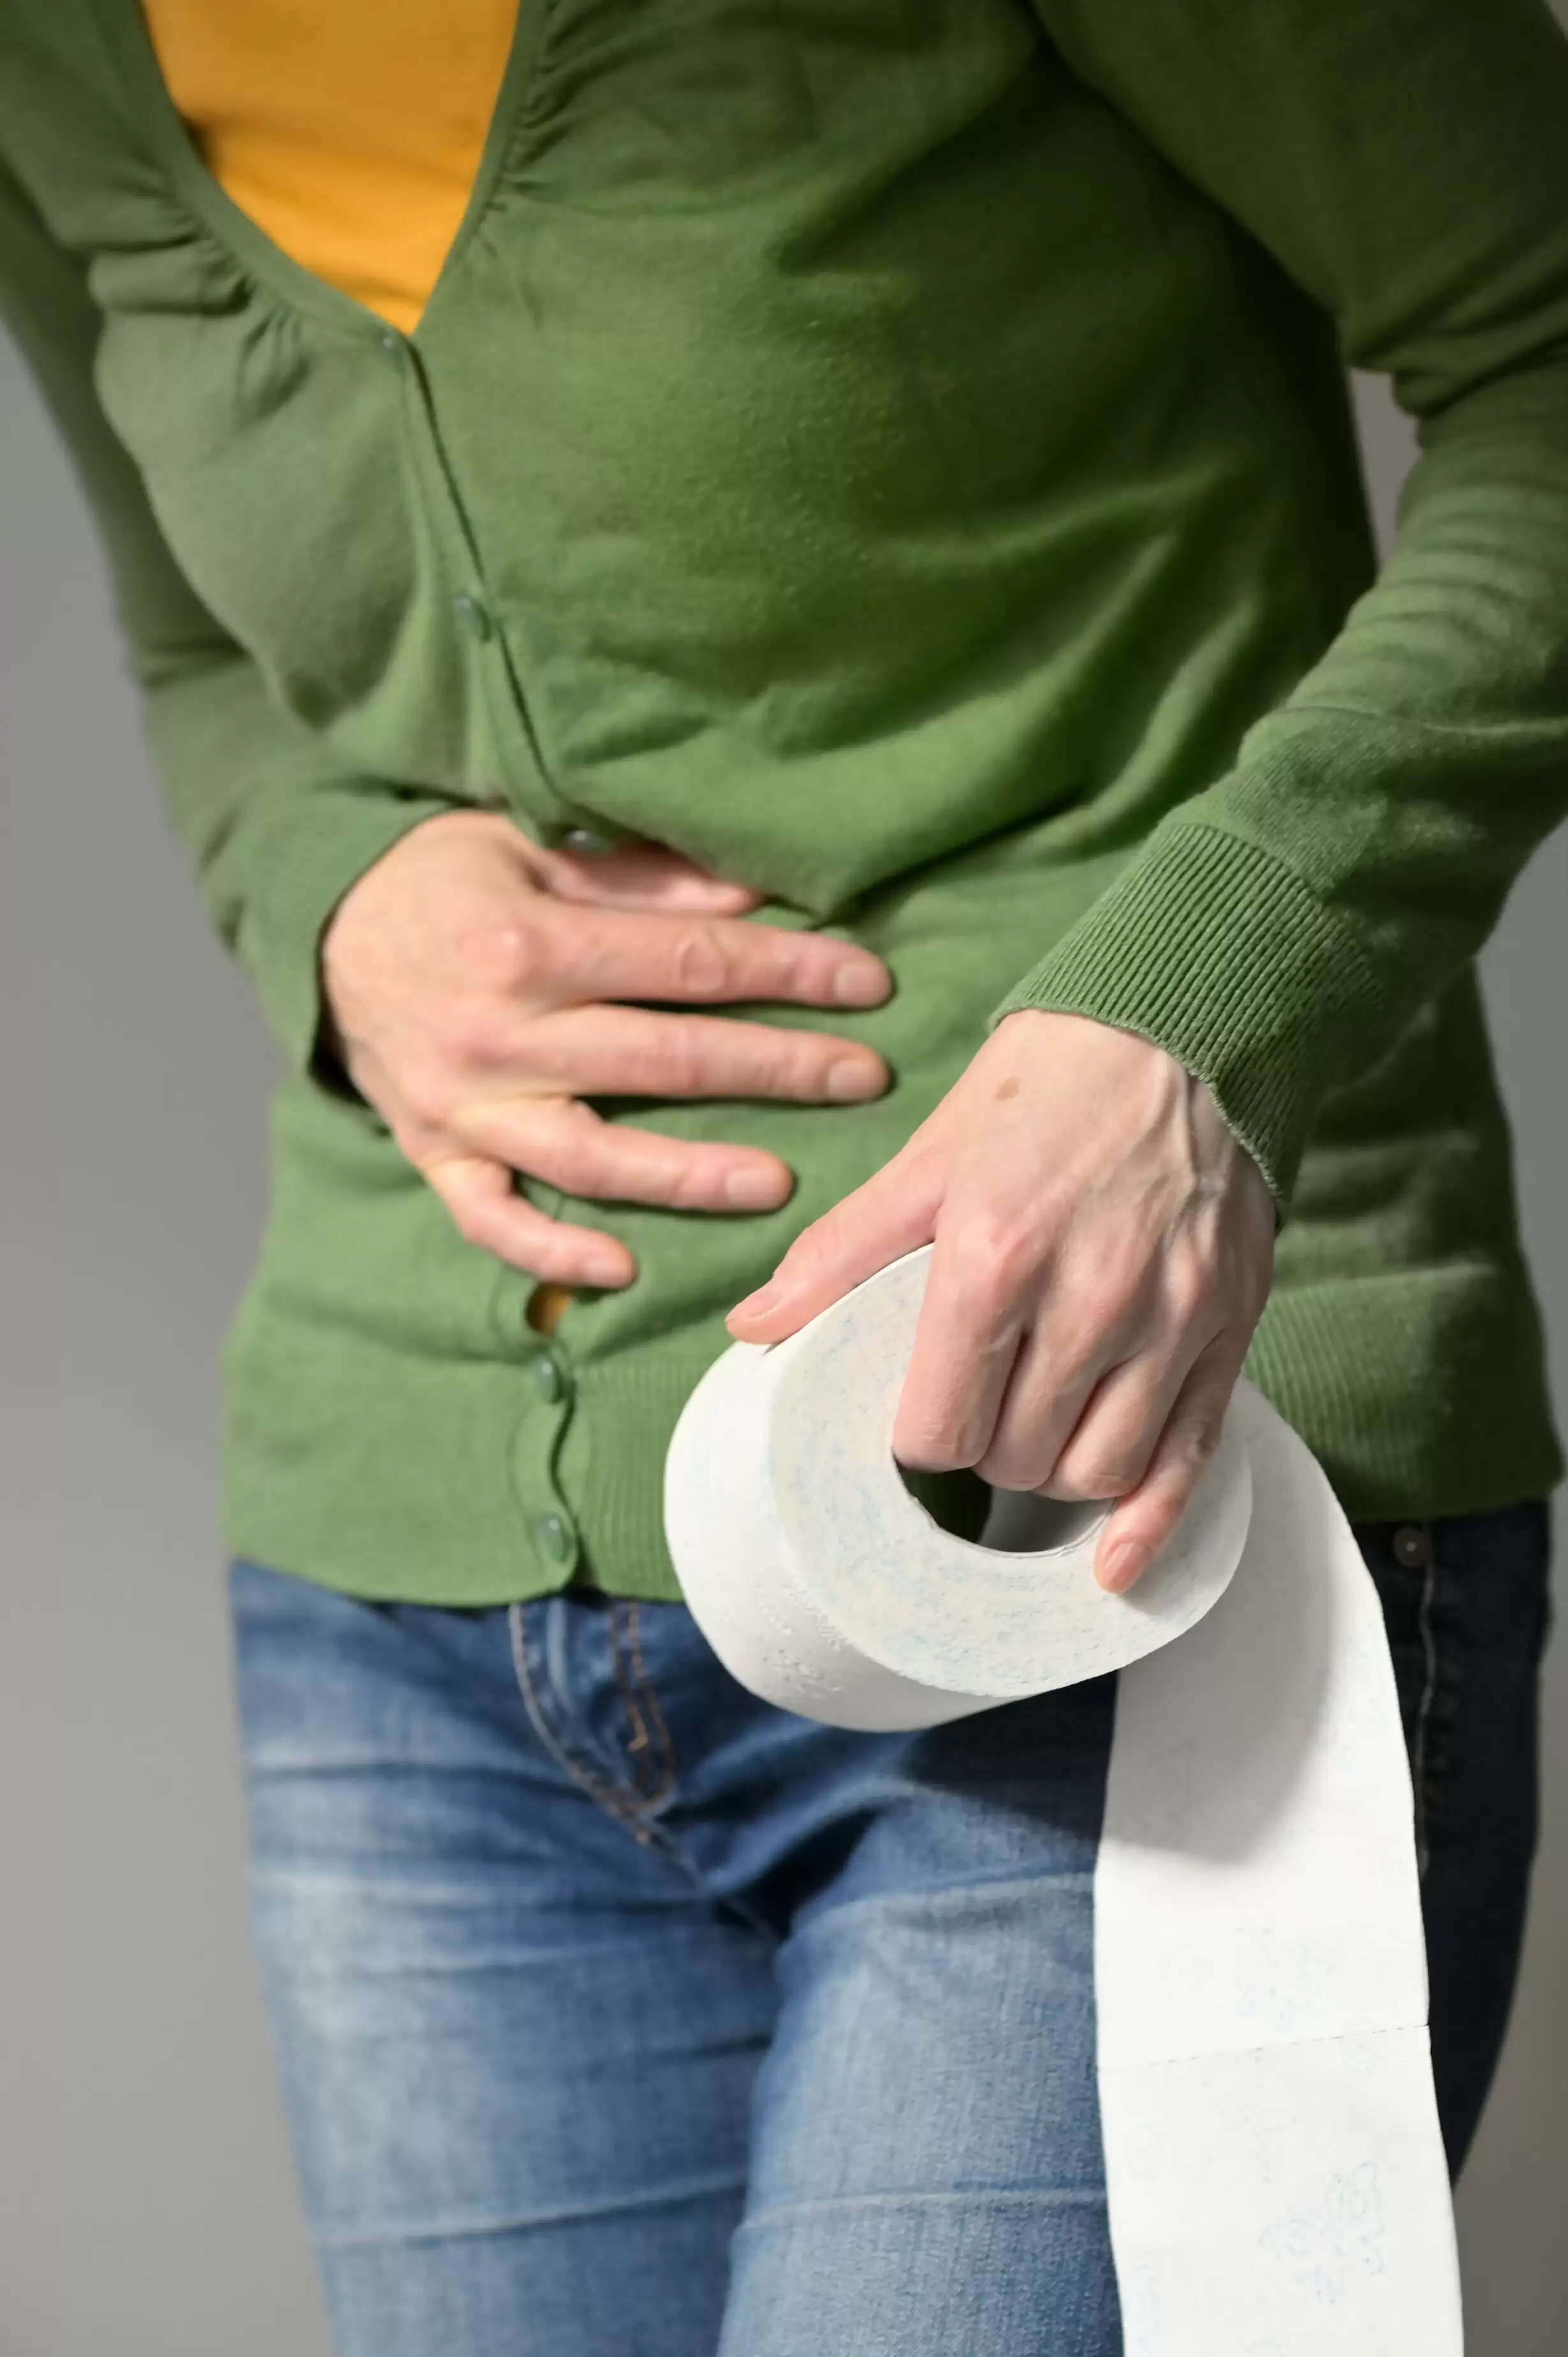 Irritable bowel syndrome: Types, symptoms, causes and more